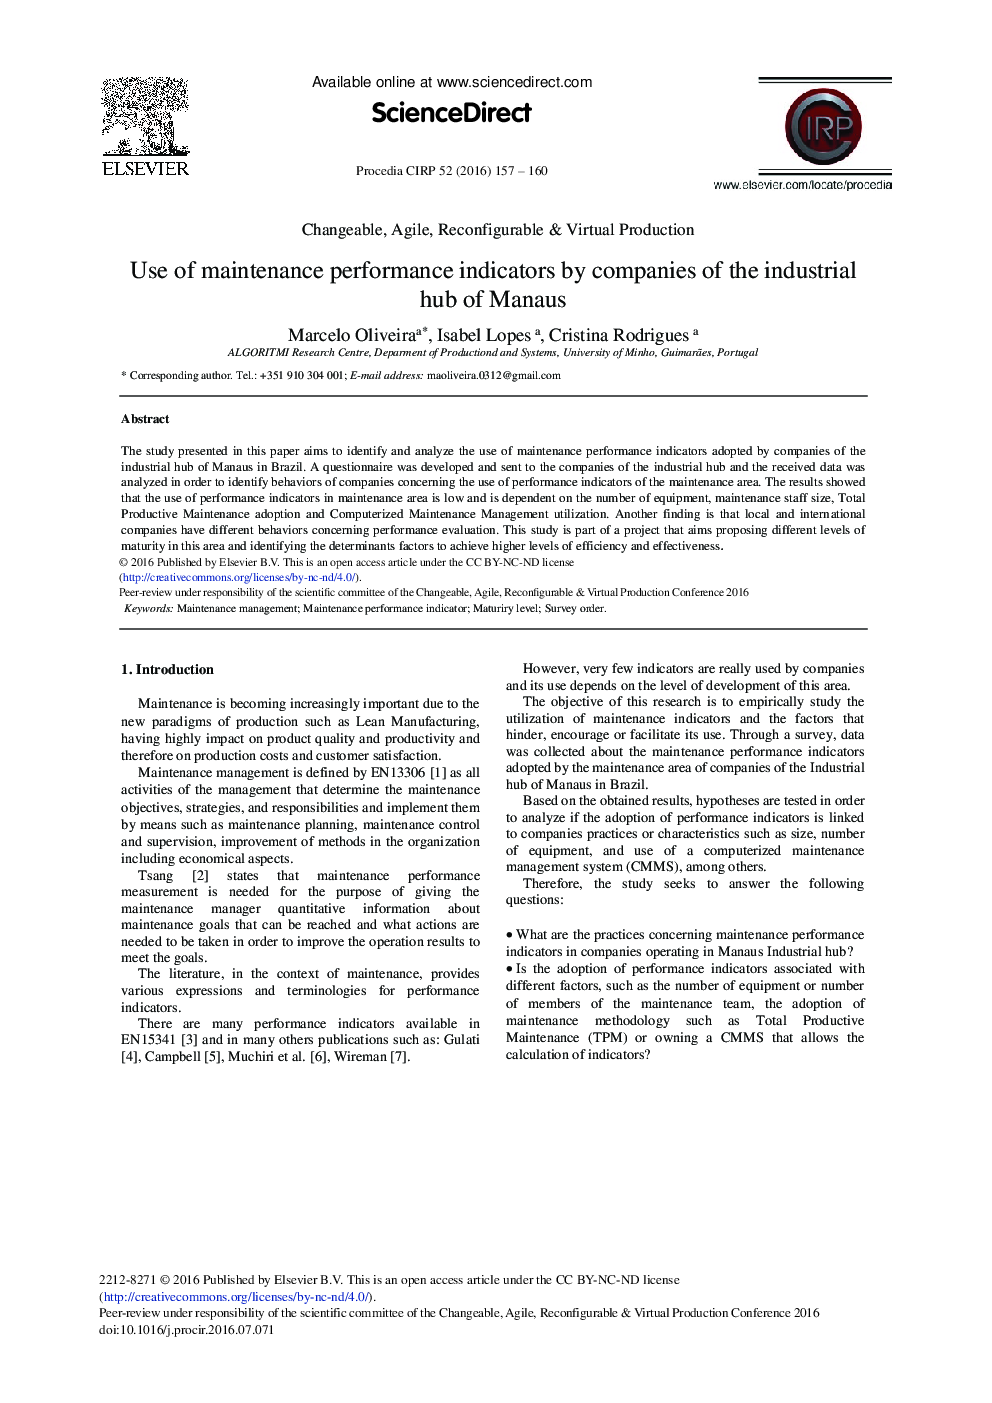 Use of Maintenance Performance Indicators by Companies of the Industrial Hub of Manaus 